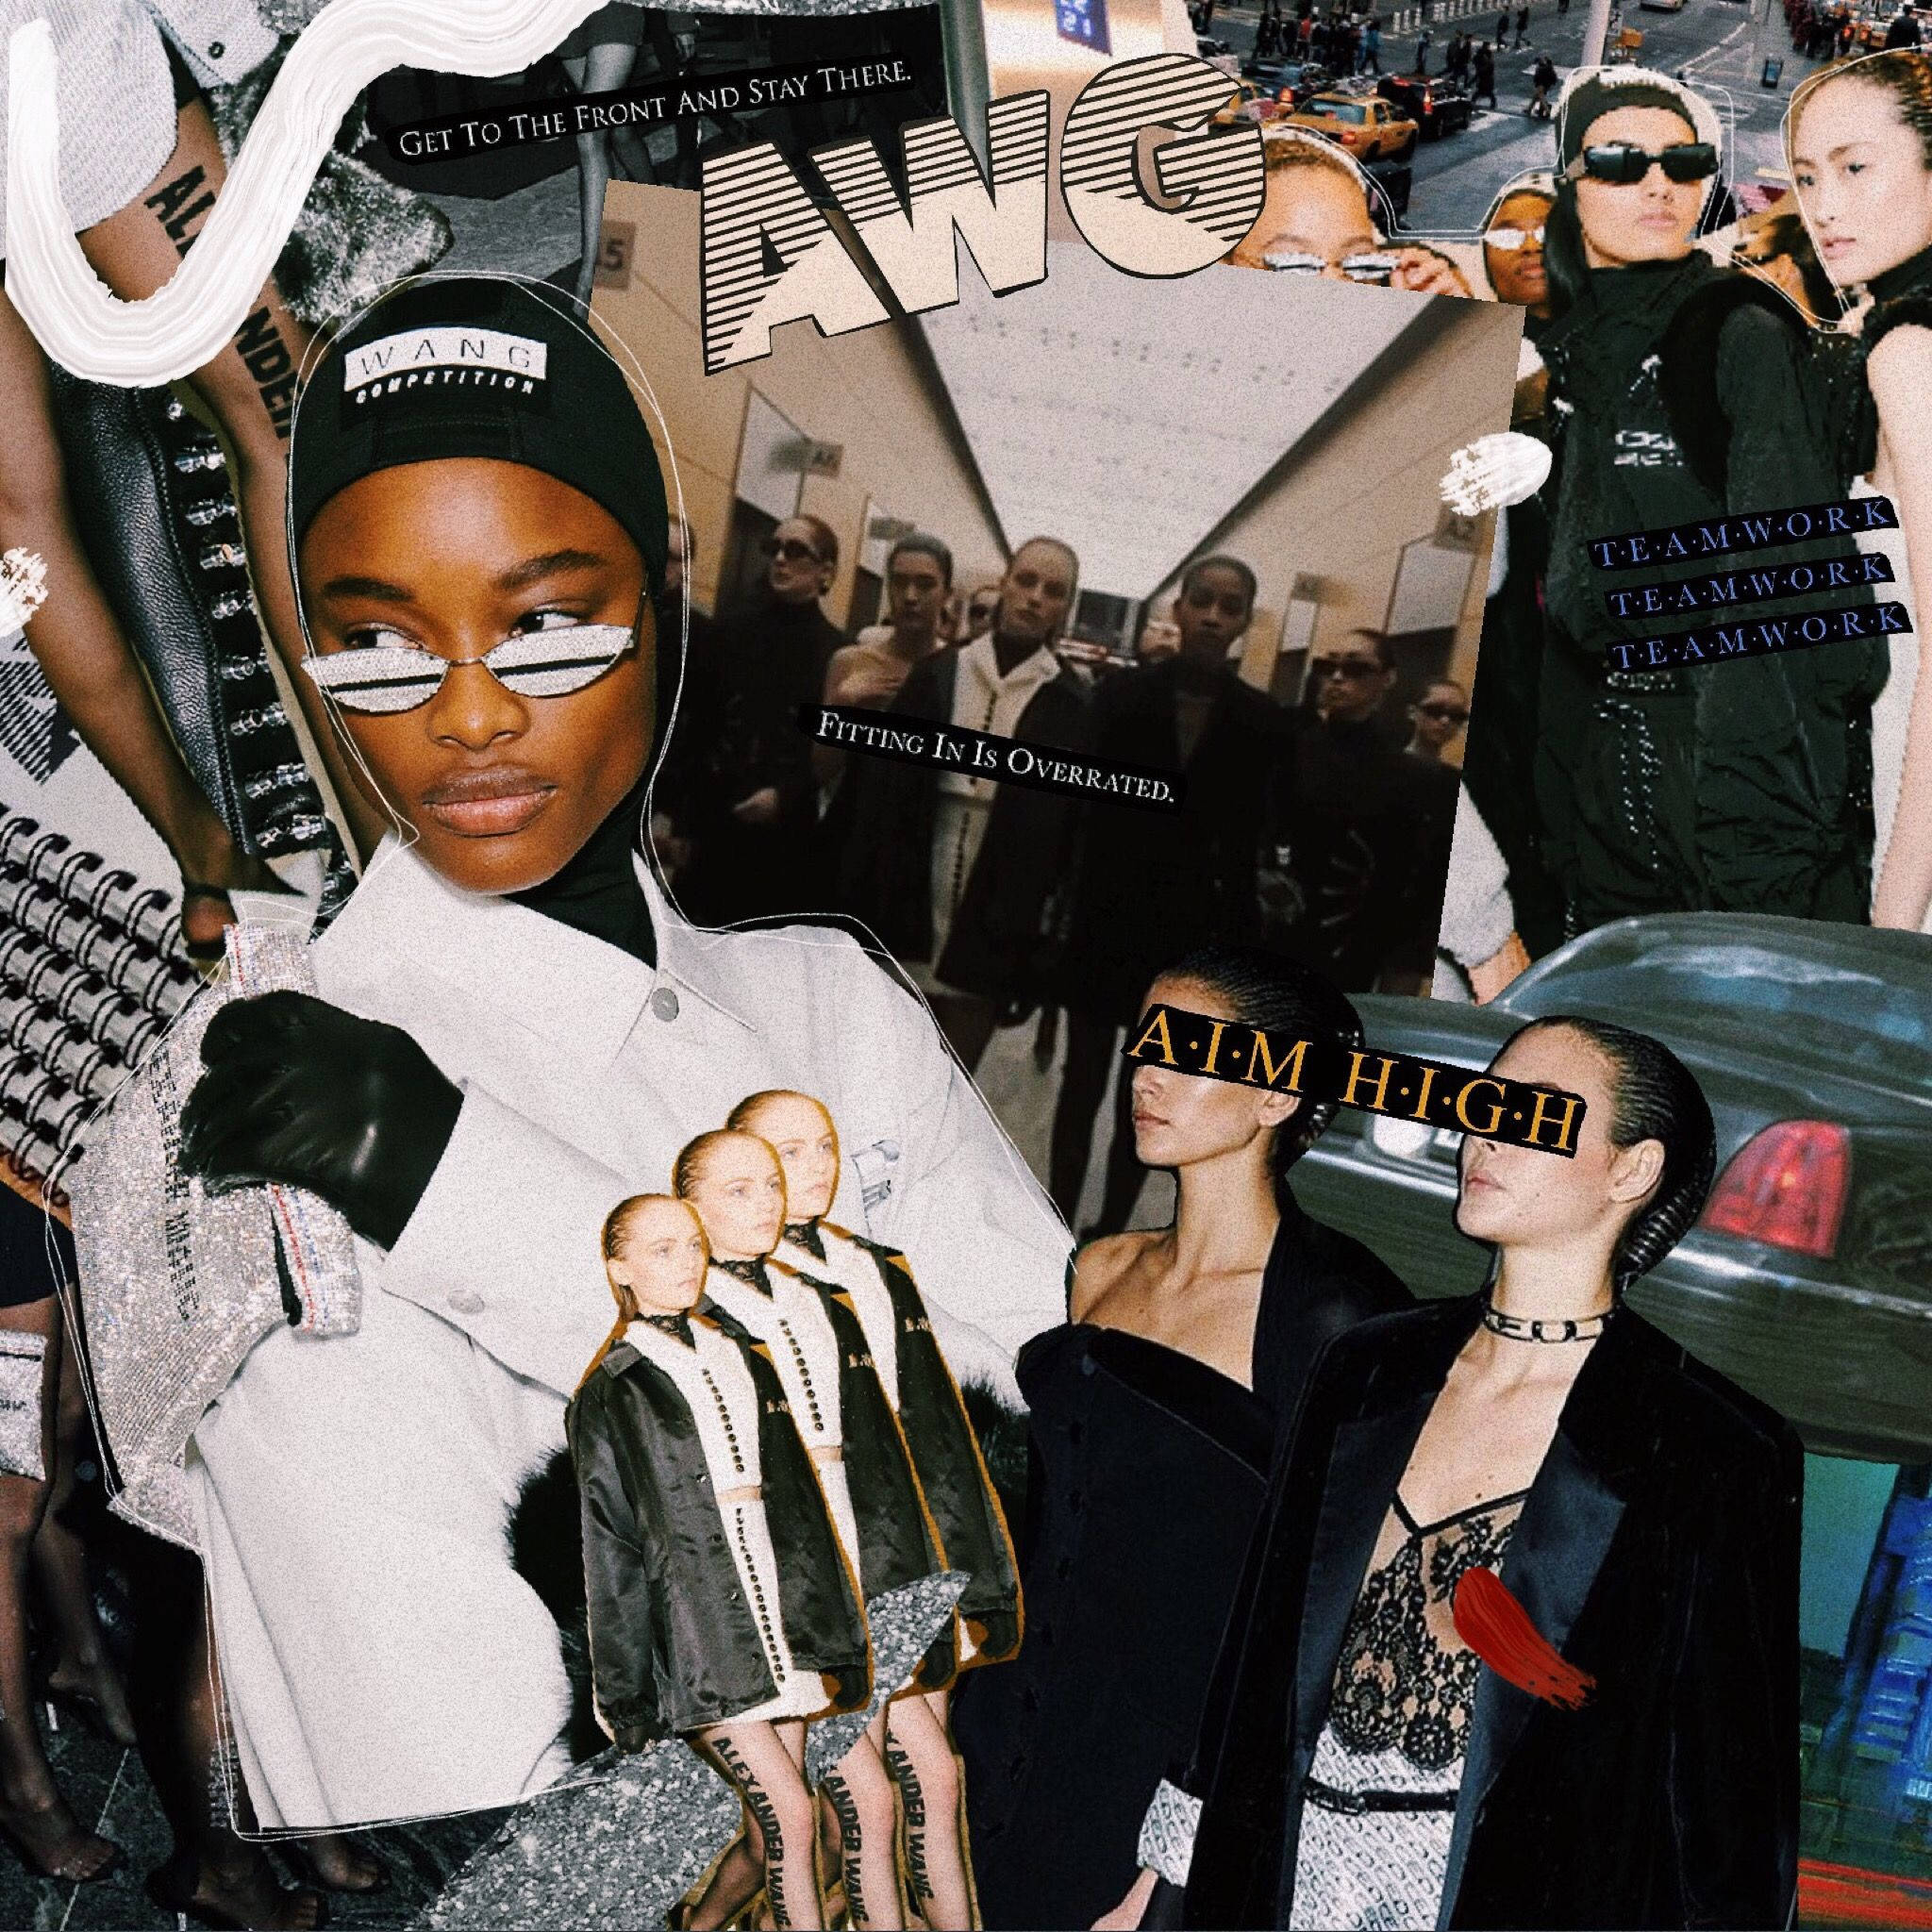 Embodying Alexander Wang's Vision - A Mood Board Collage Wallpaper